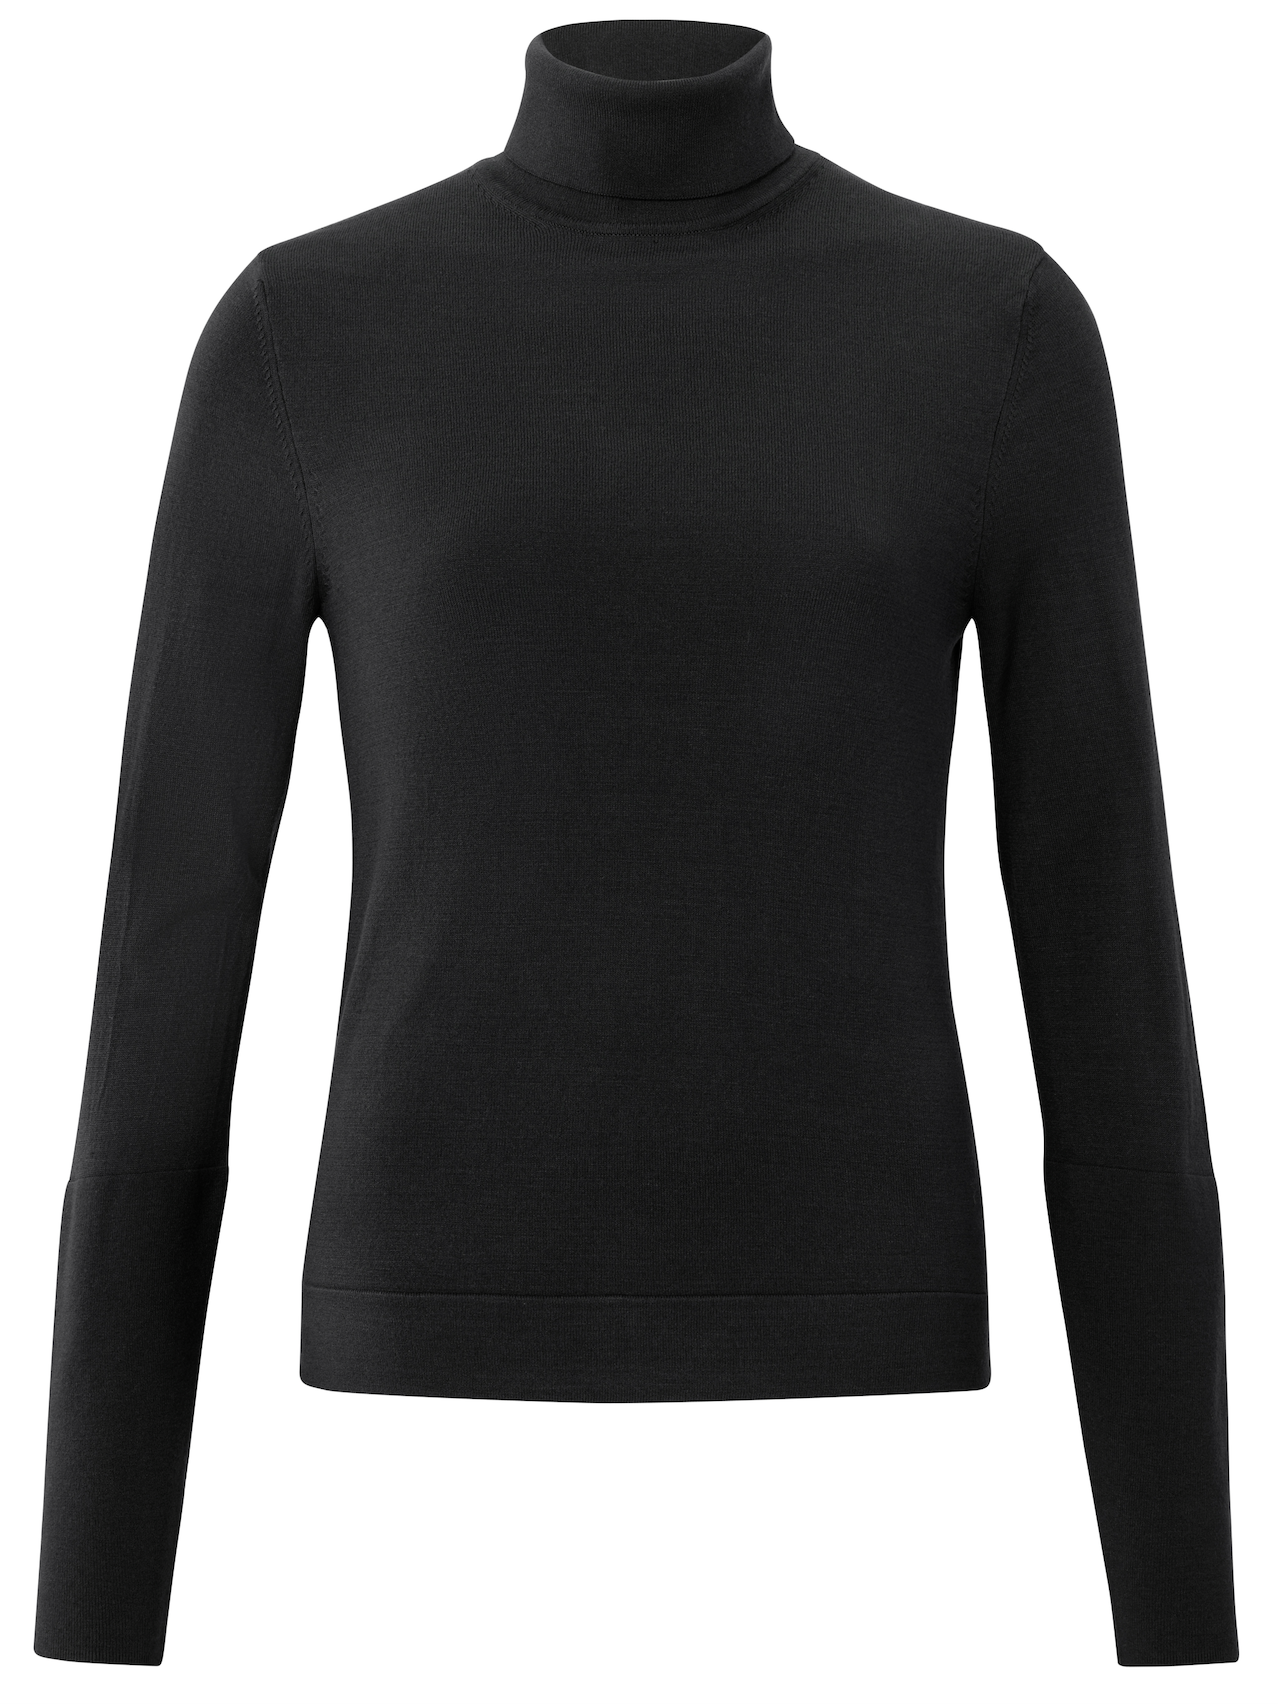 Turtleneck Sweater With Buttoned Cuff by Yaya